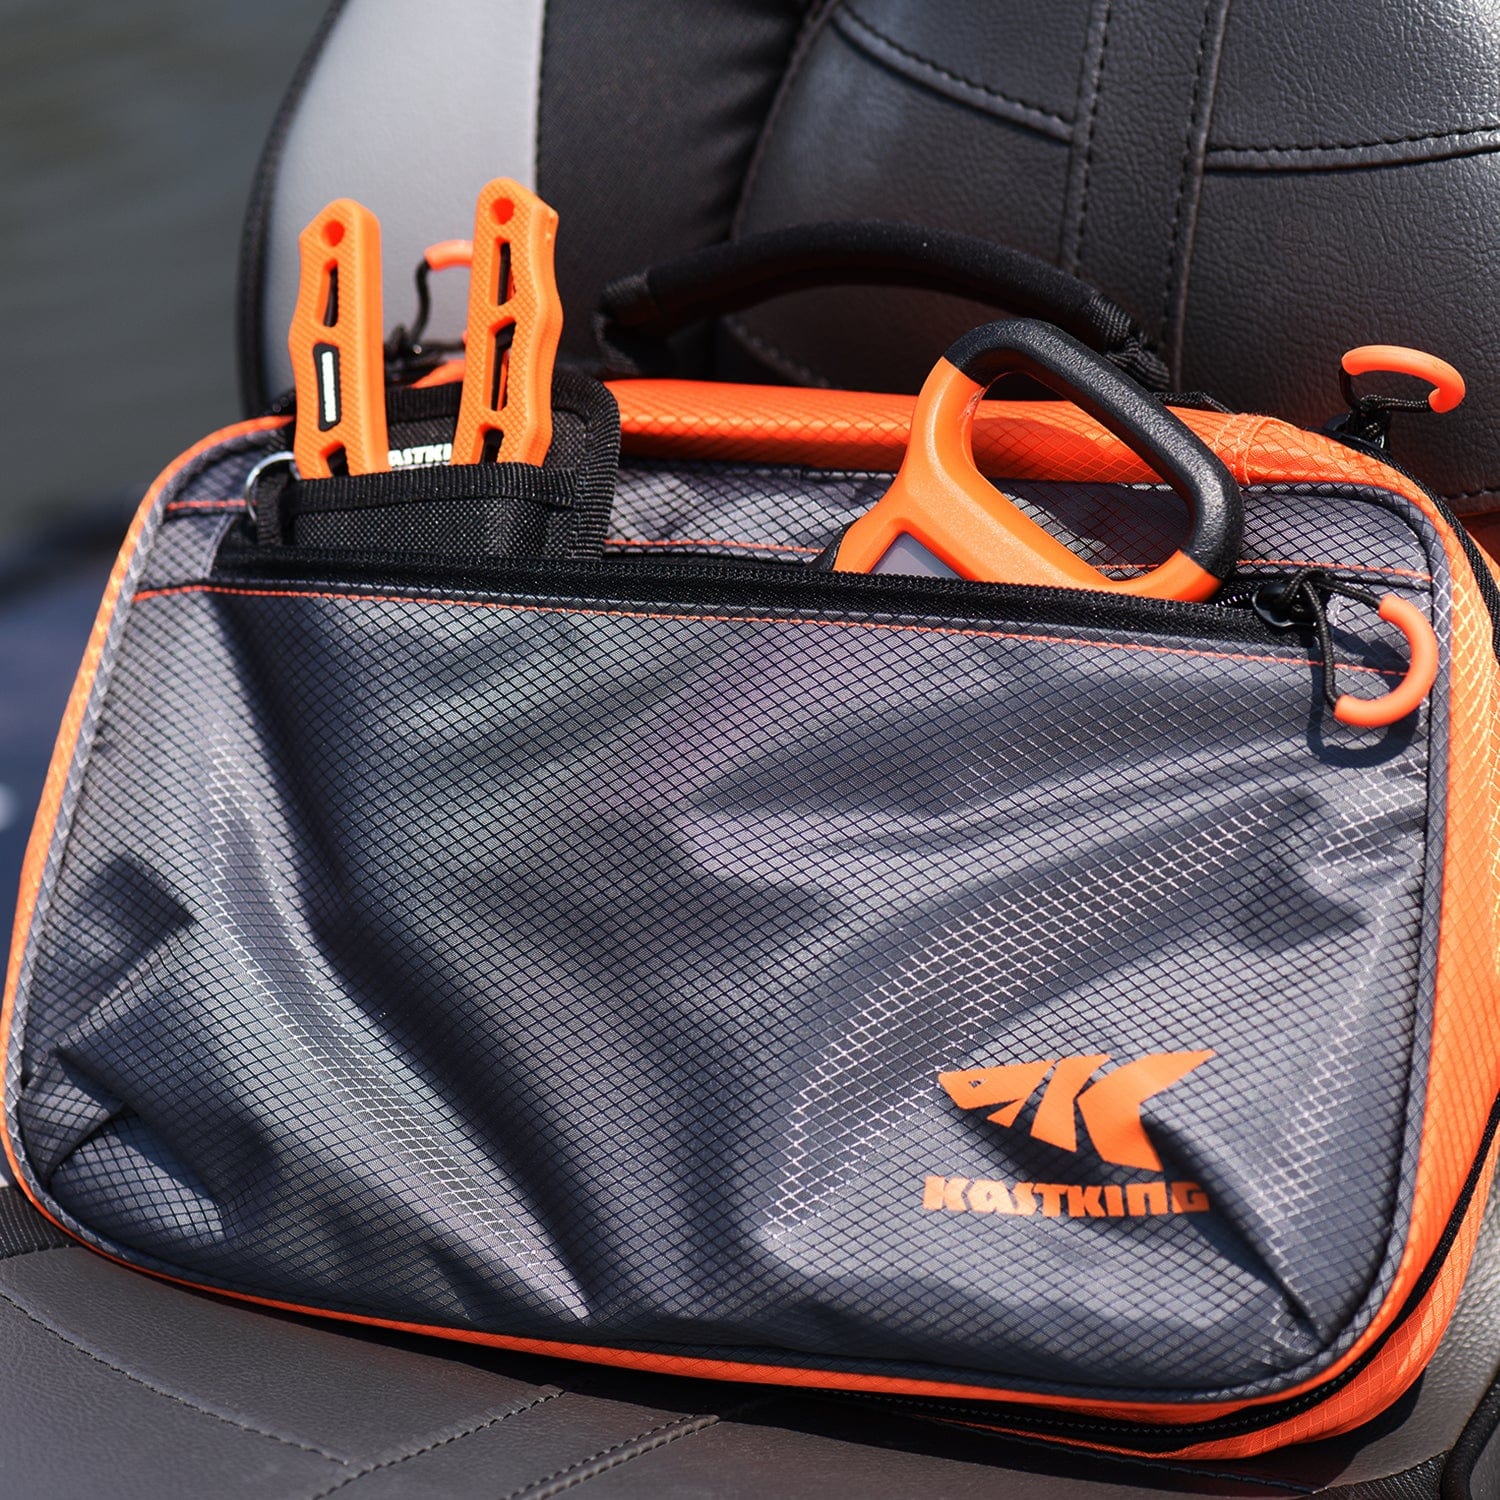 New bait boss tackle backpacks from @kastking The bag that keeps